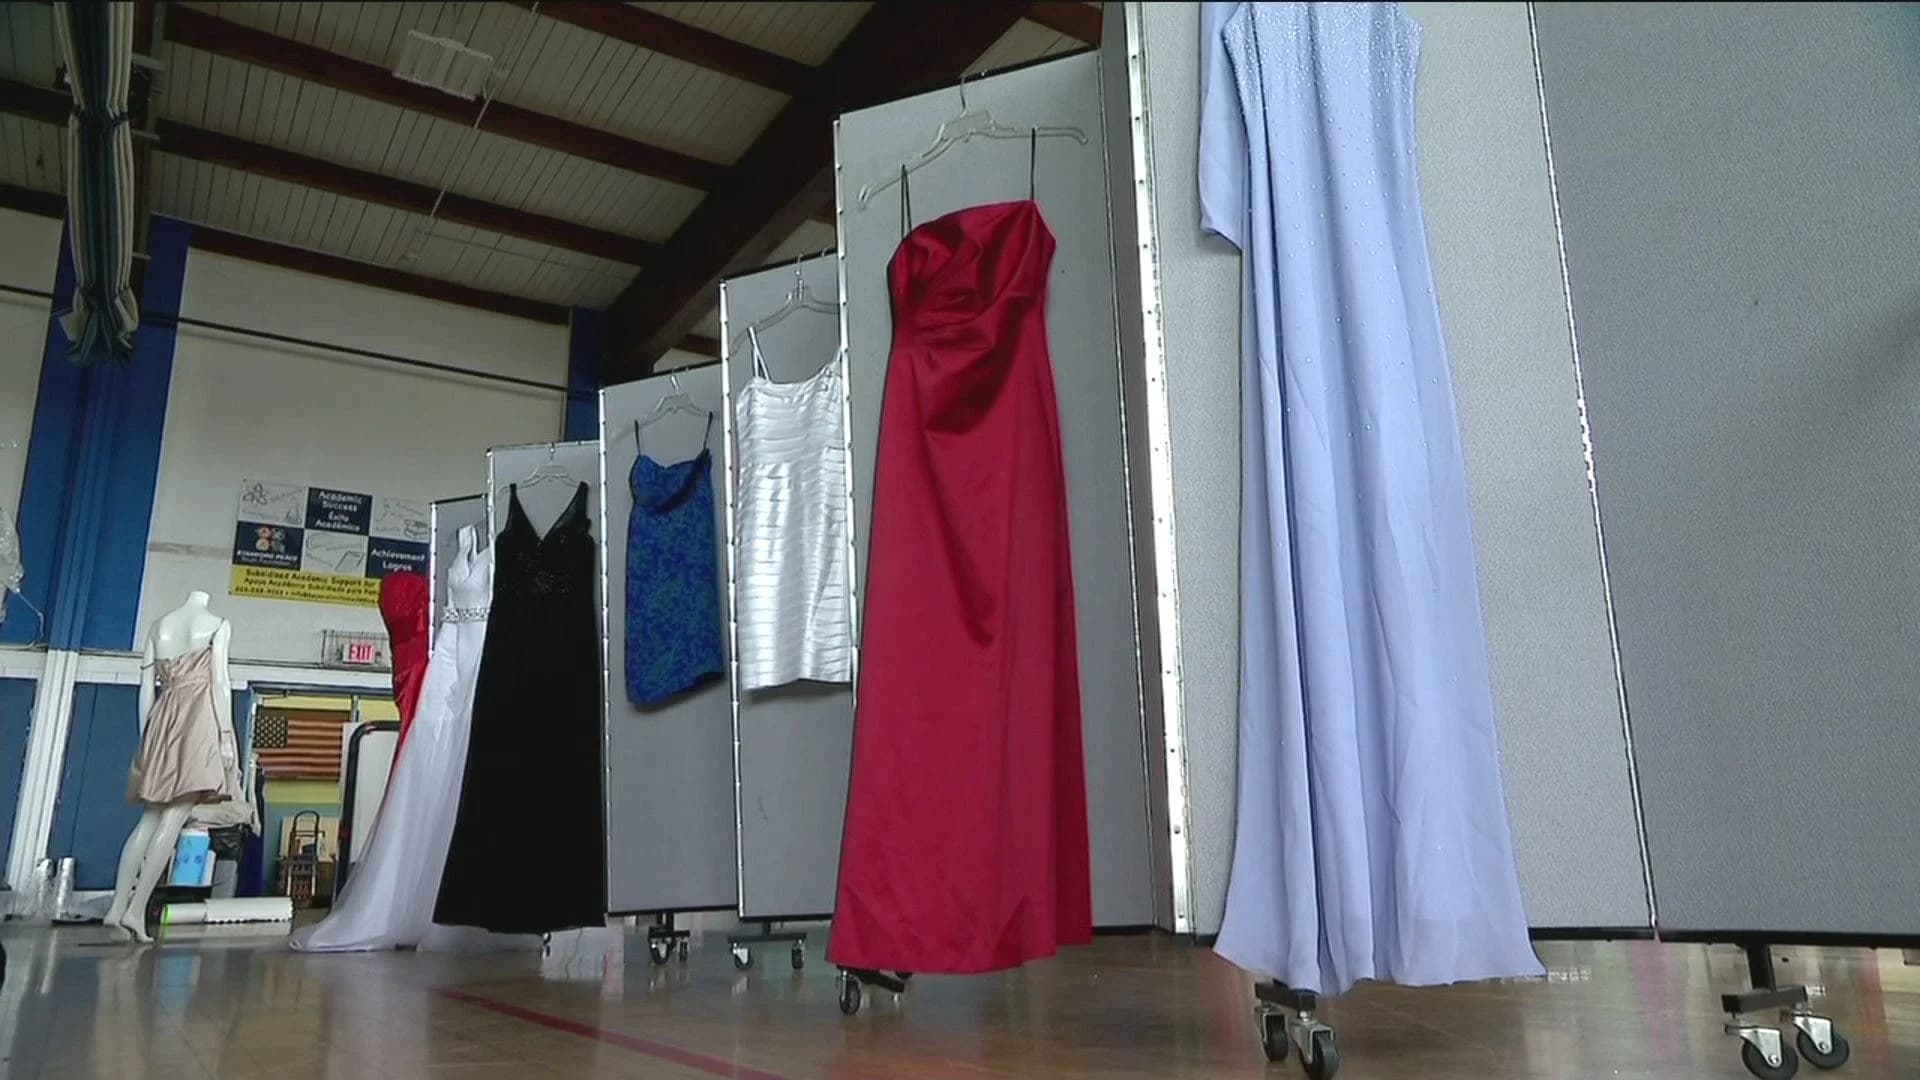 Stamford's Kids Helping Kids group offers free formal clothing